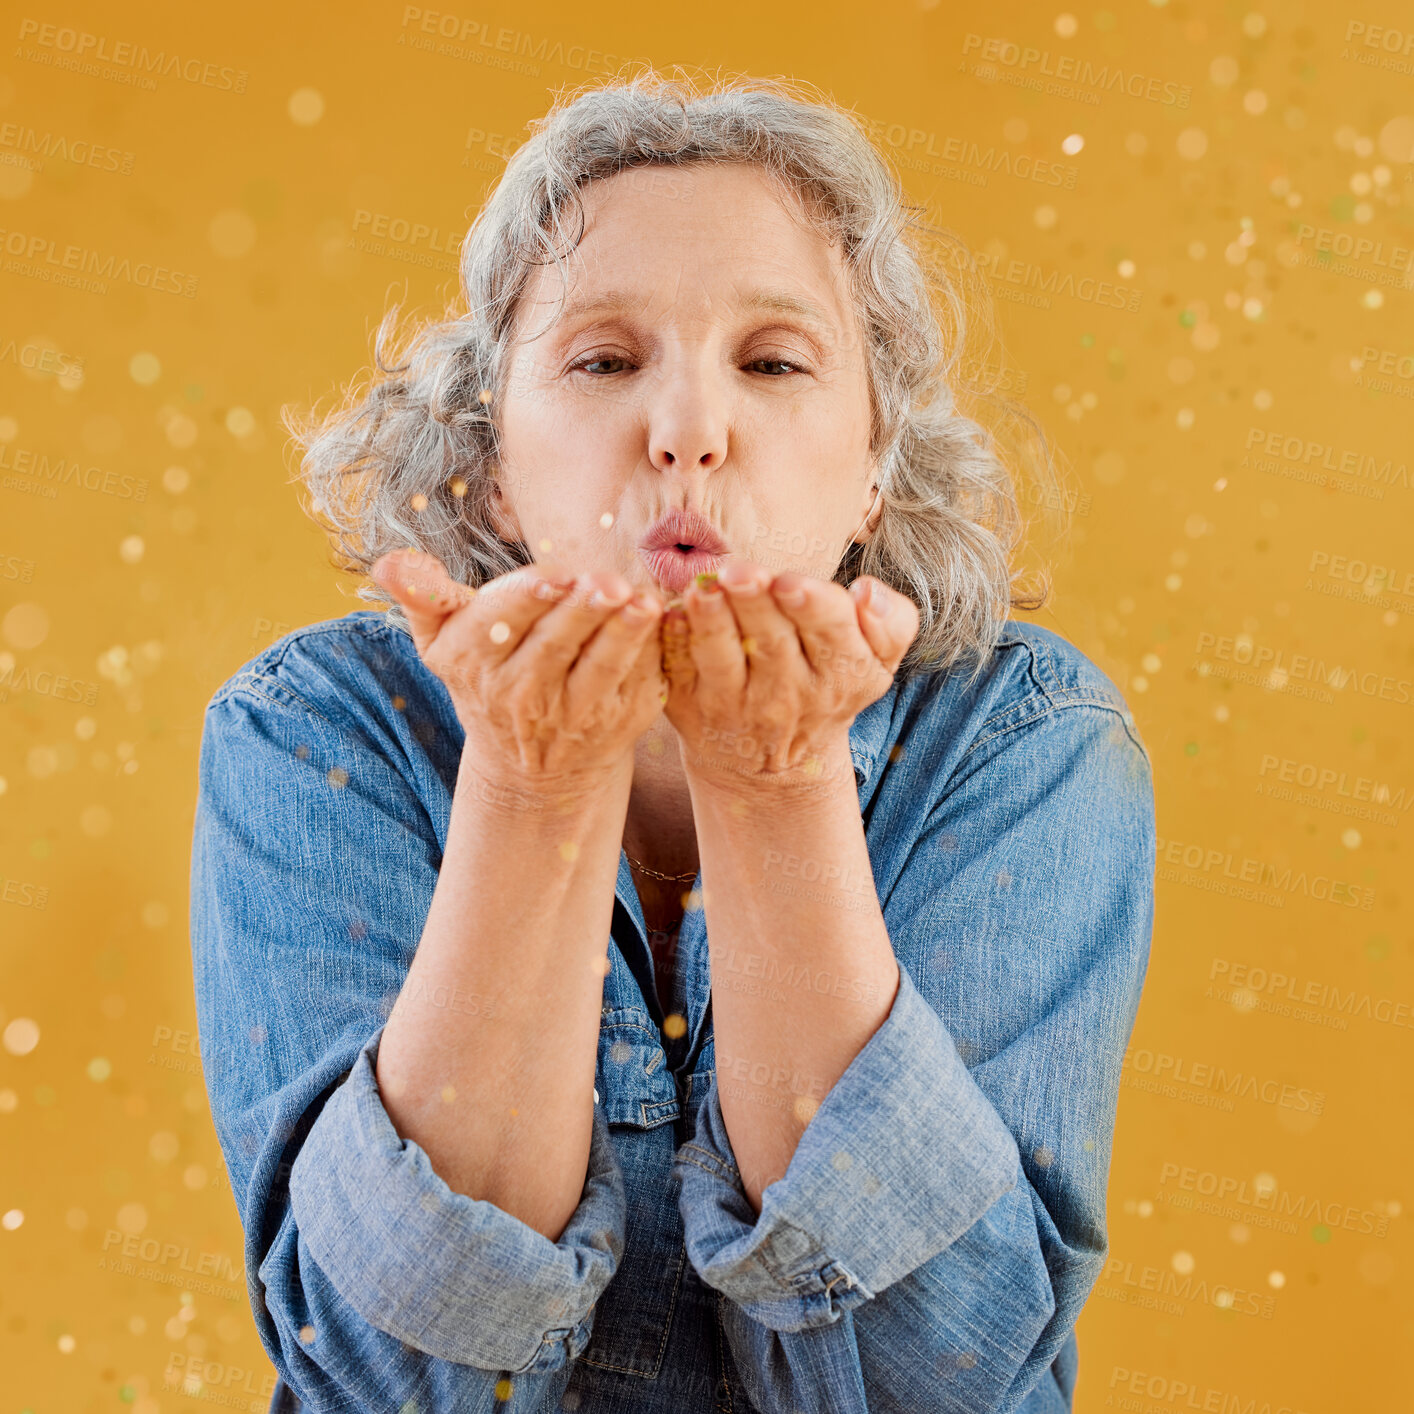 Buy stock photo One happy mature caucasian woman blowing confetti out of the palm of her hands while posing against a yellow background in the studio. Smiling white lady showing joy and happiness while celebrating